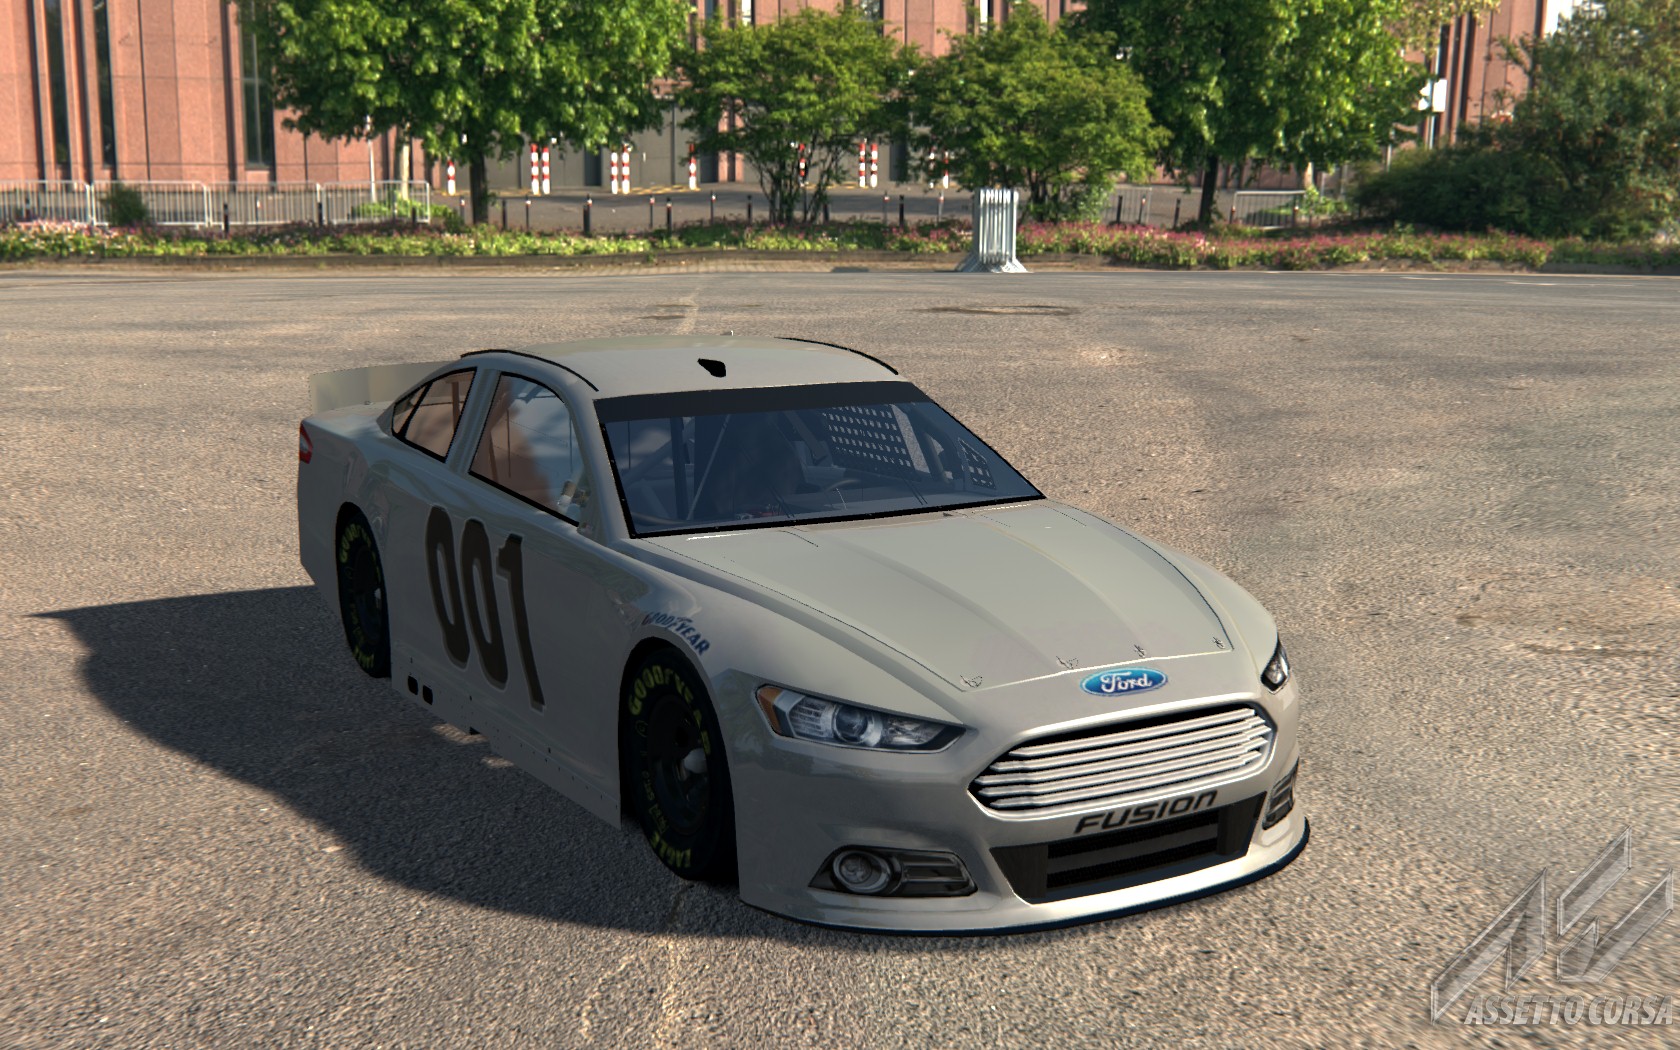 Ford Fusion Nascar Preview Image